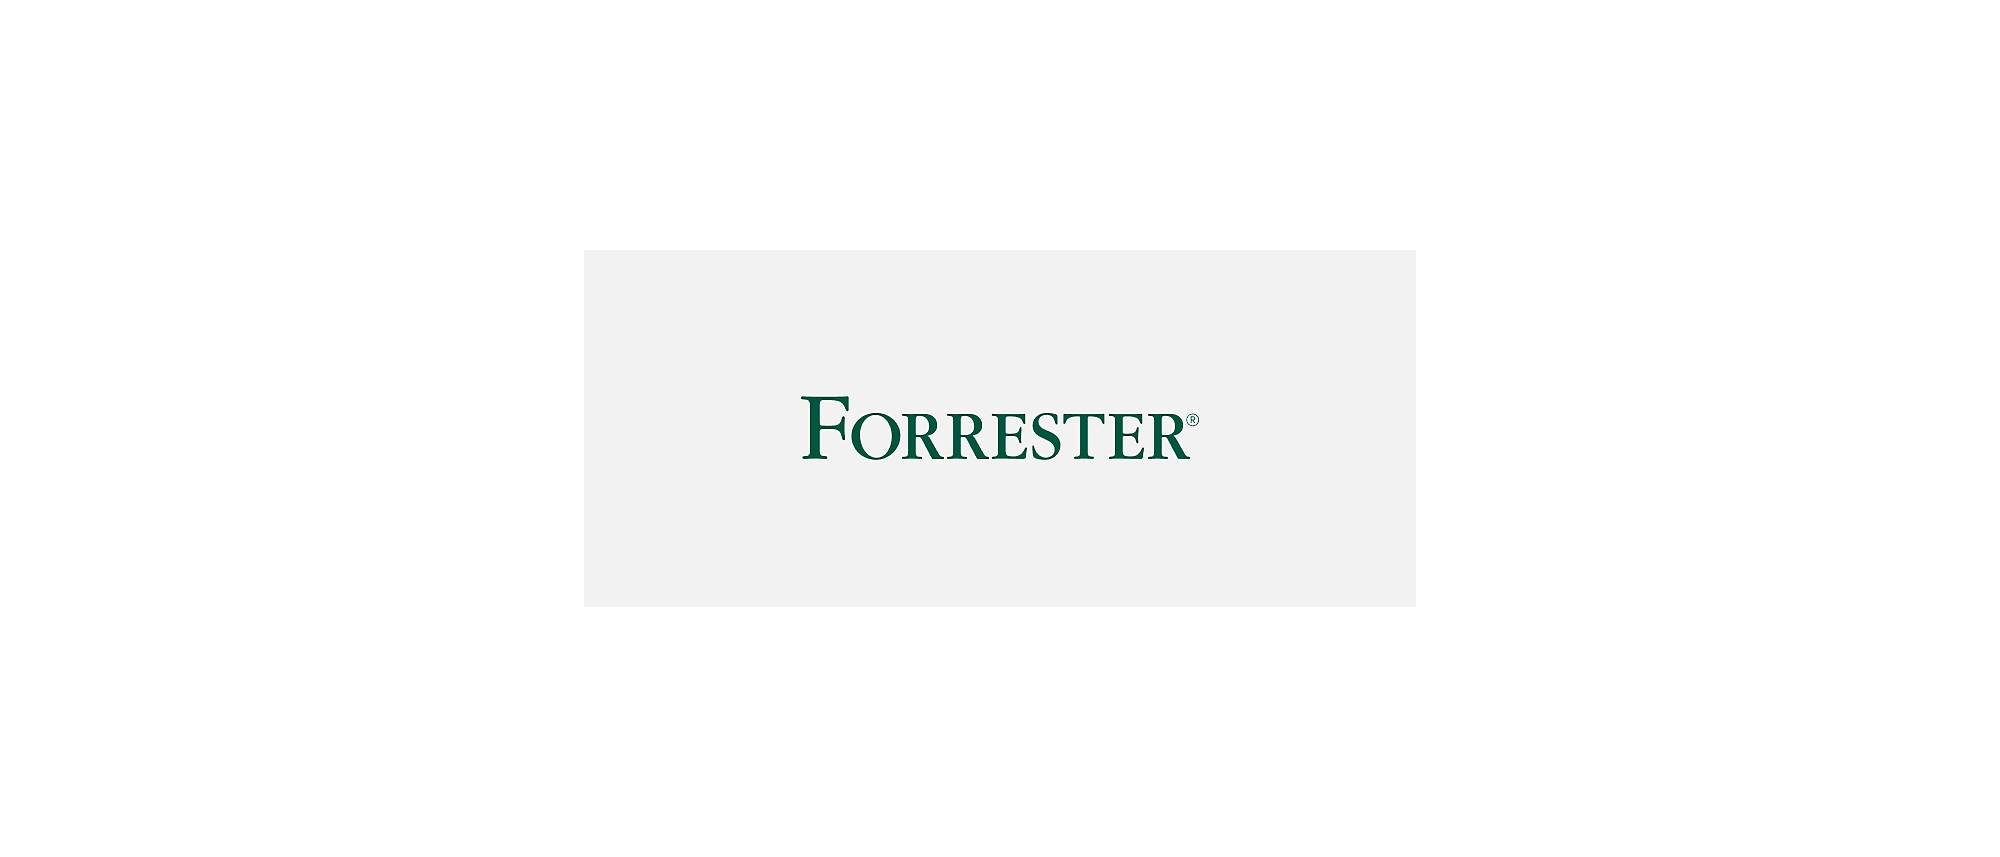 Forester标志